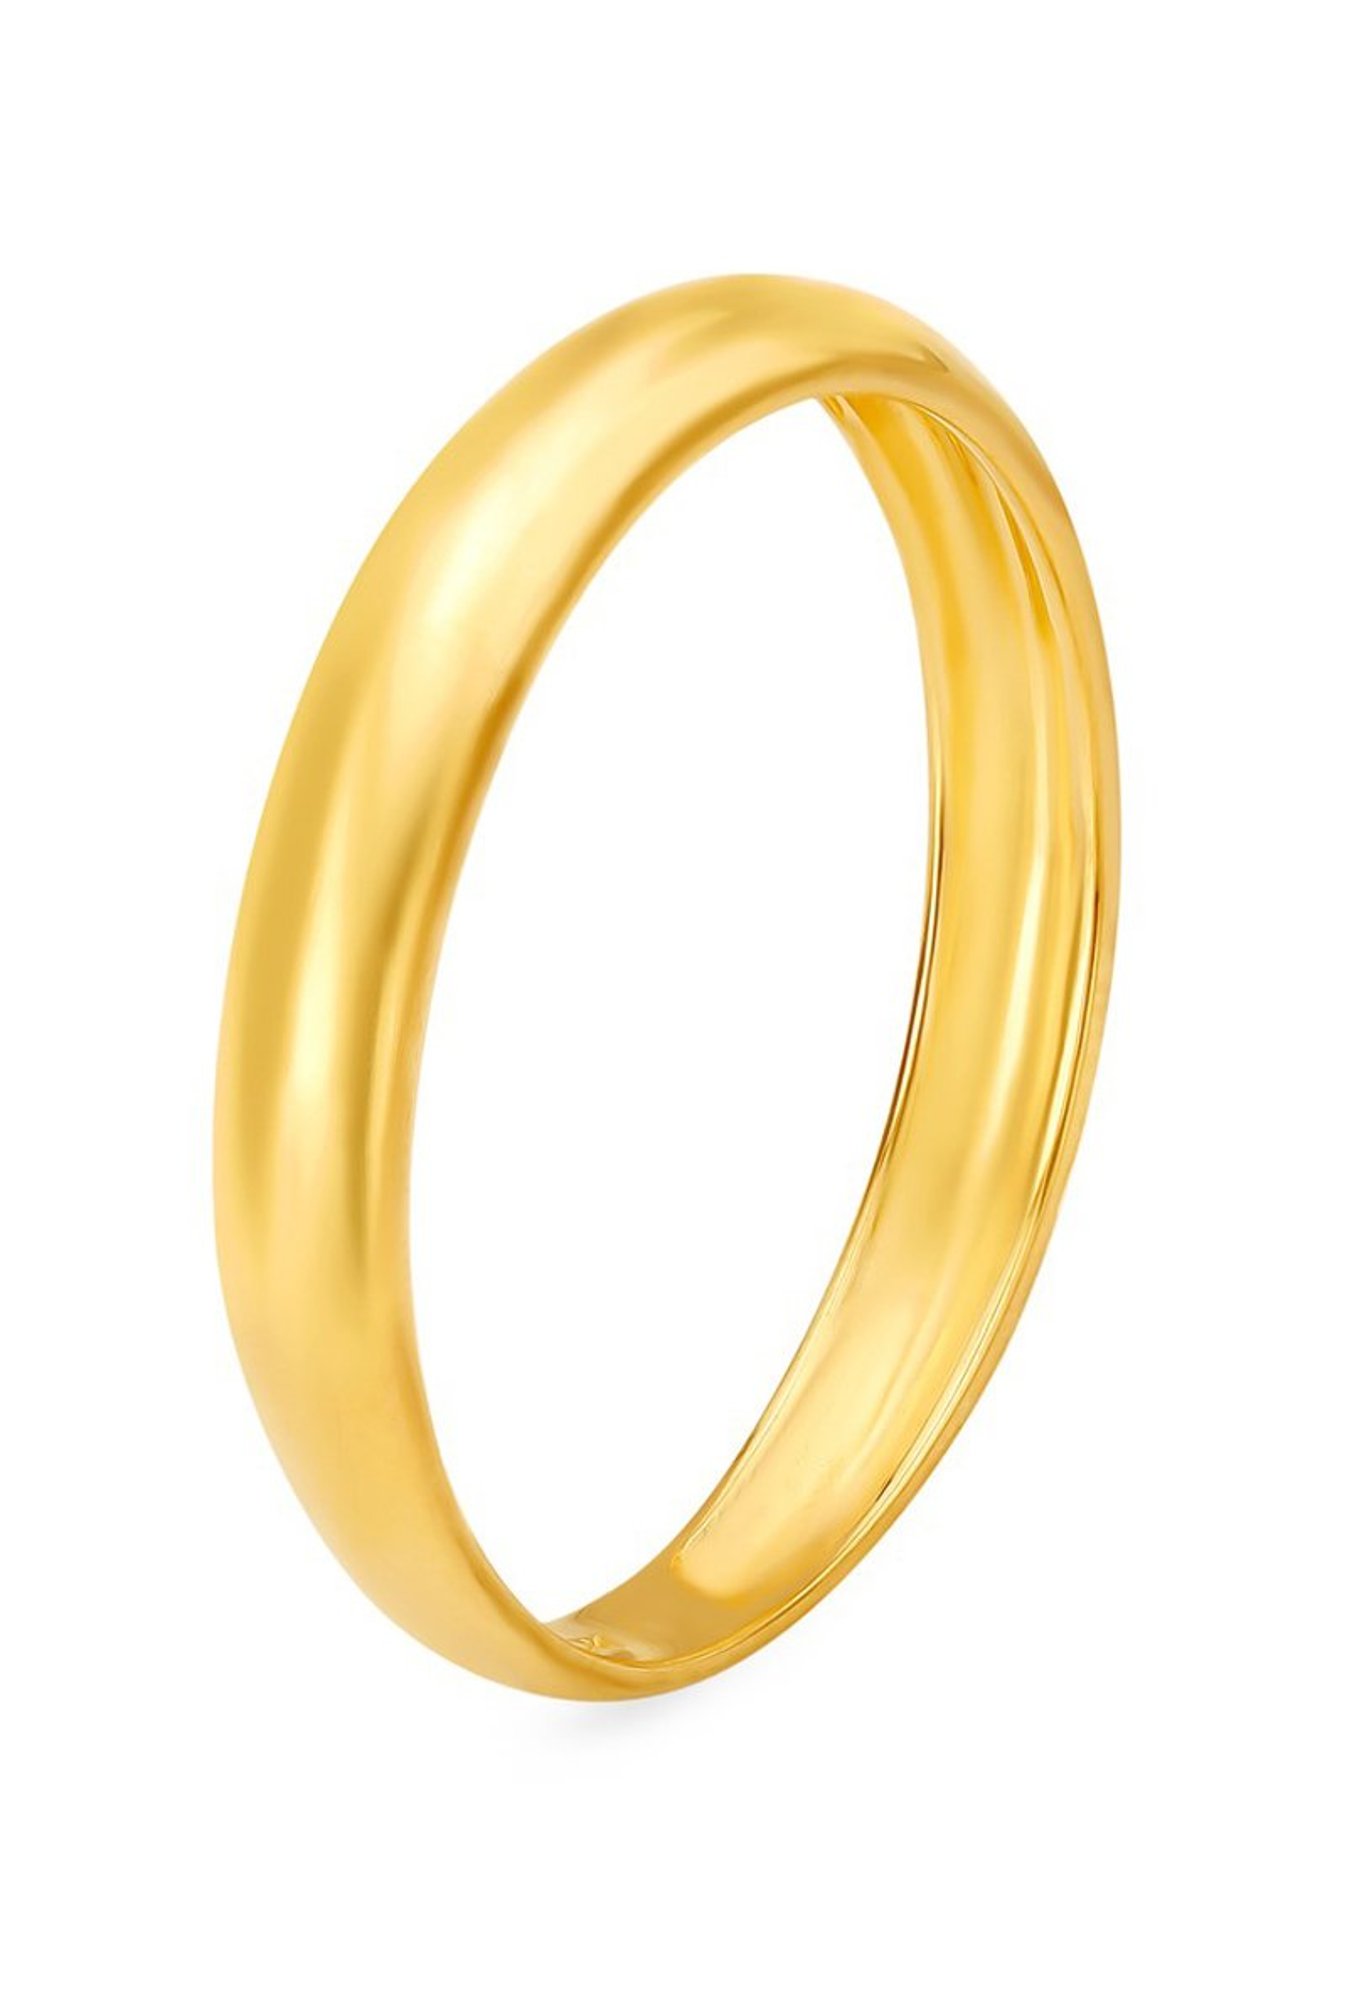 Shop Gold Rings Online In India At Best Prices | Tata CLiQ